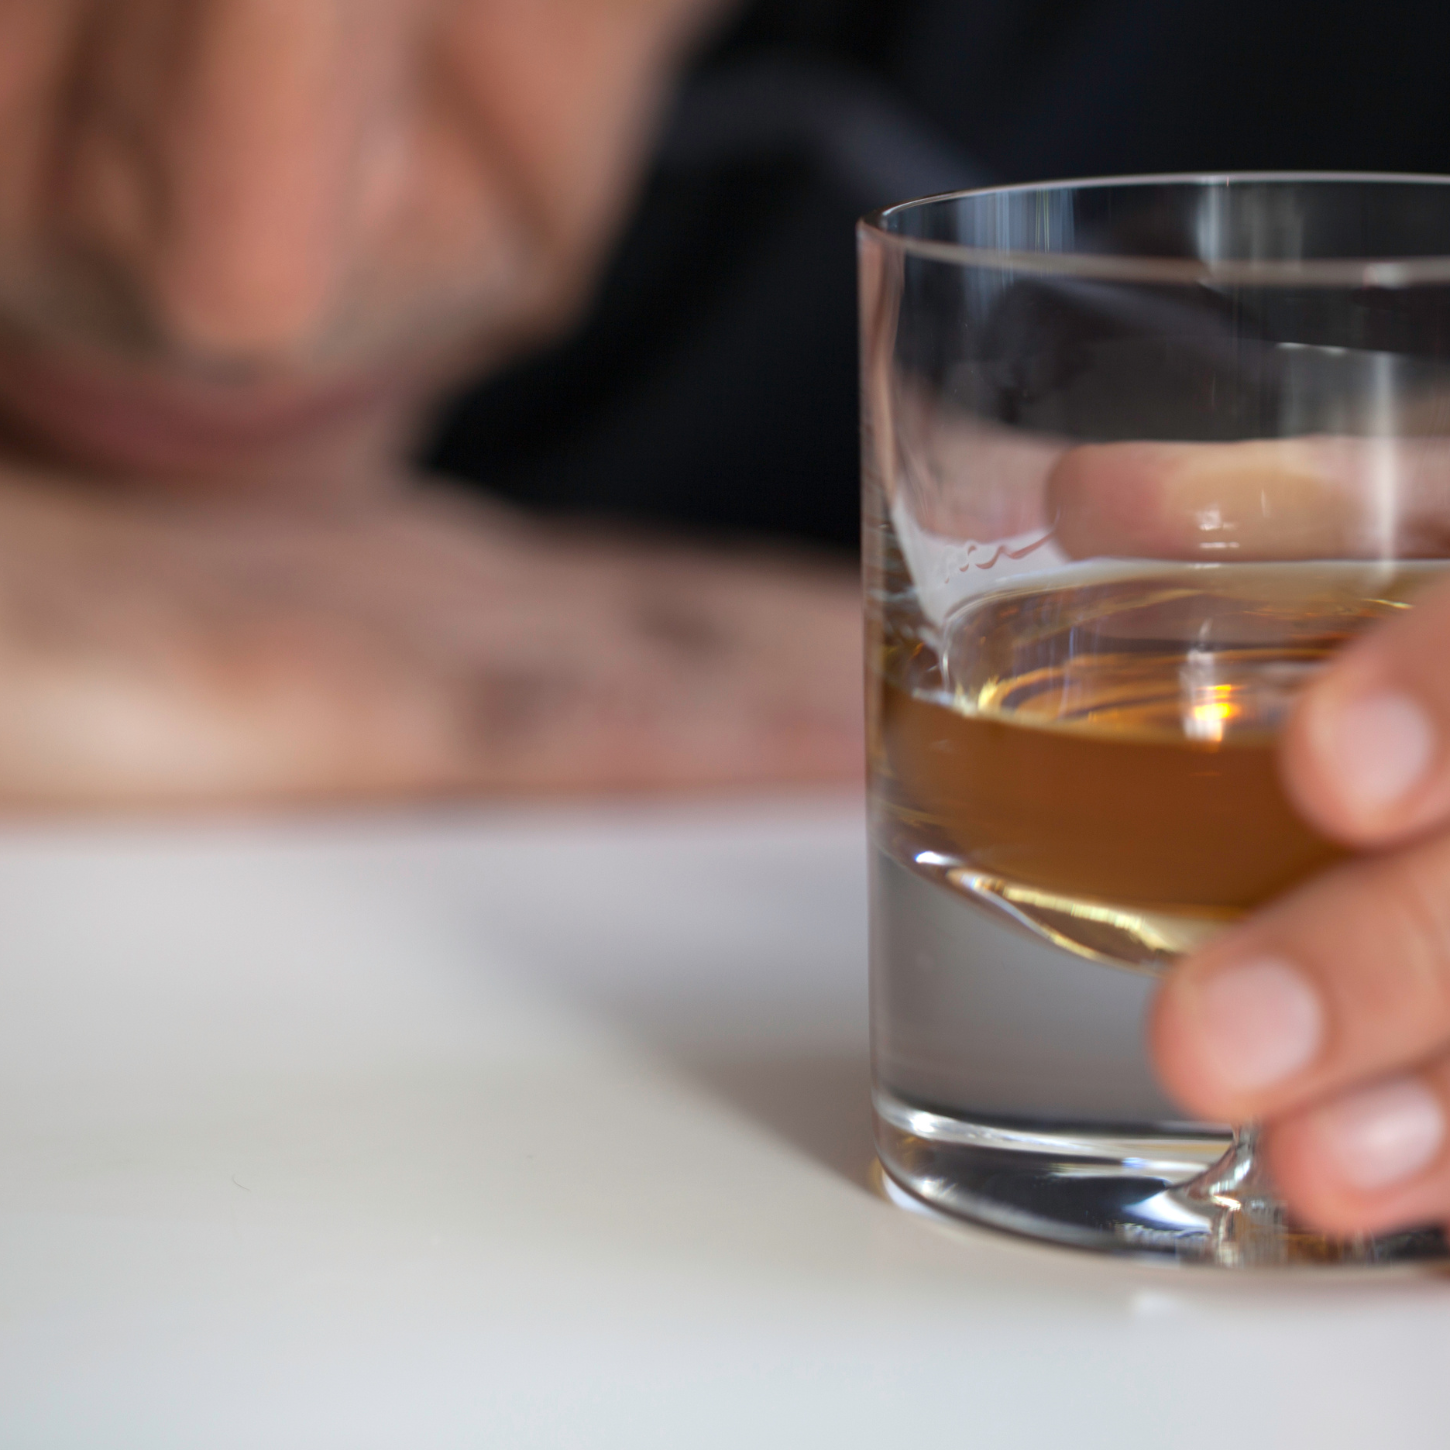 To Drink or Not to Drink? The Effects of Alcohol on Our Health